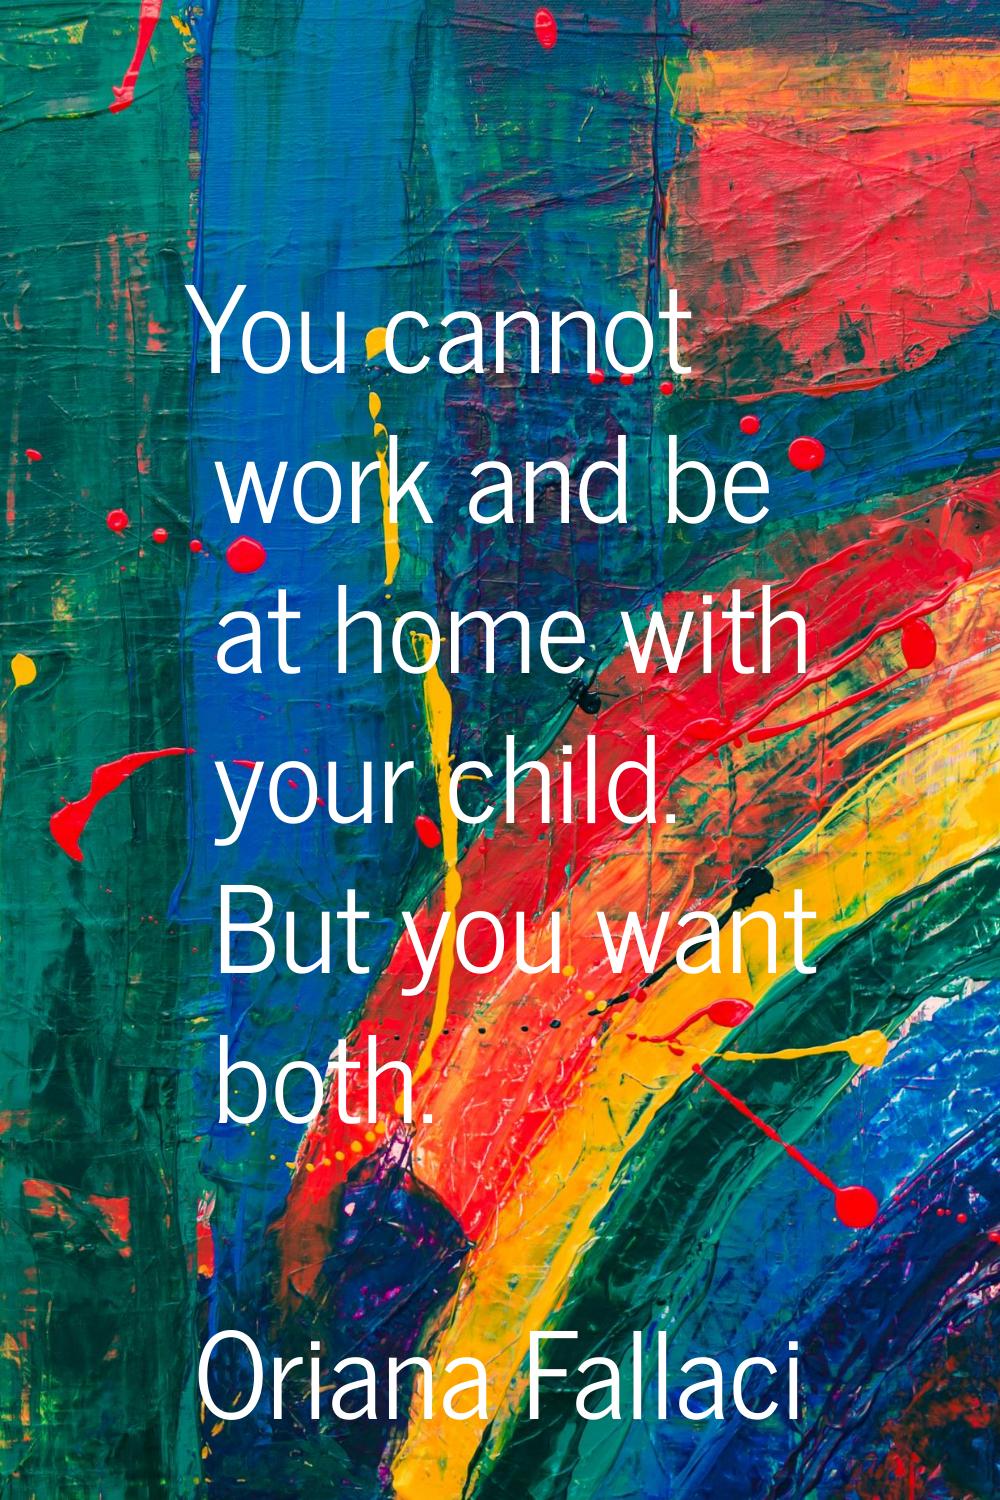 You cannot work and be at home with your child. But you want both.